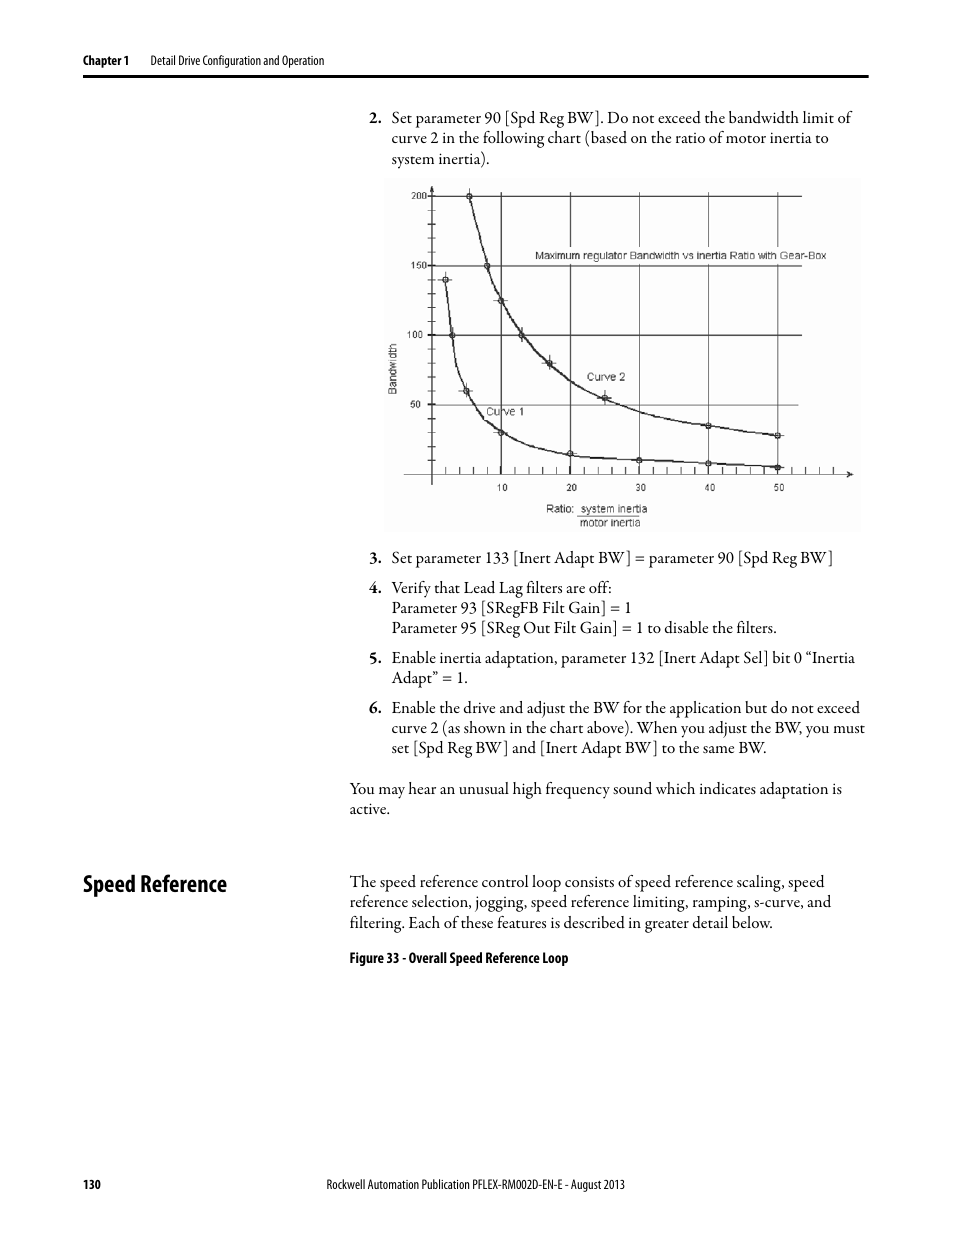 Speed reference, E speed reference on | Rockwell Automation 20D PowerFlex 700S with Phase I Control Reference Manual User Manual | Page 130 / 190